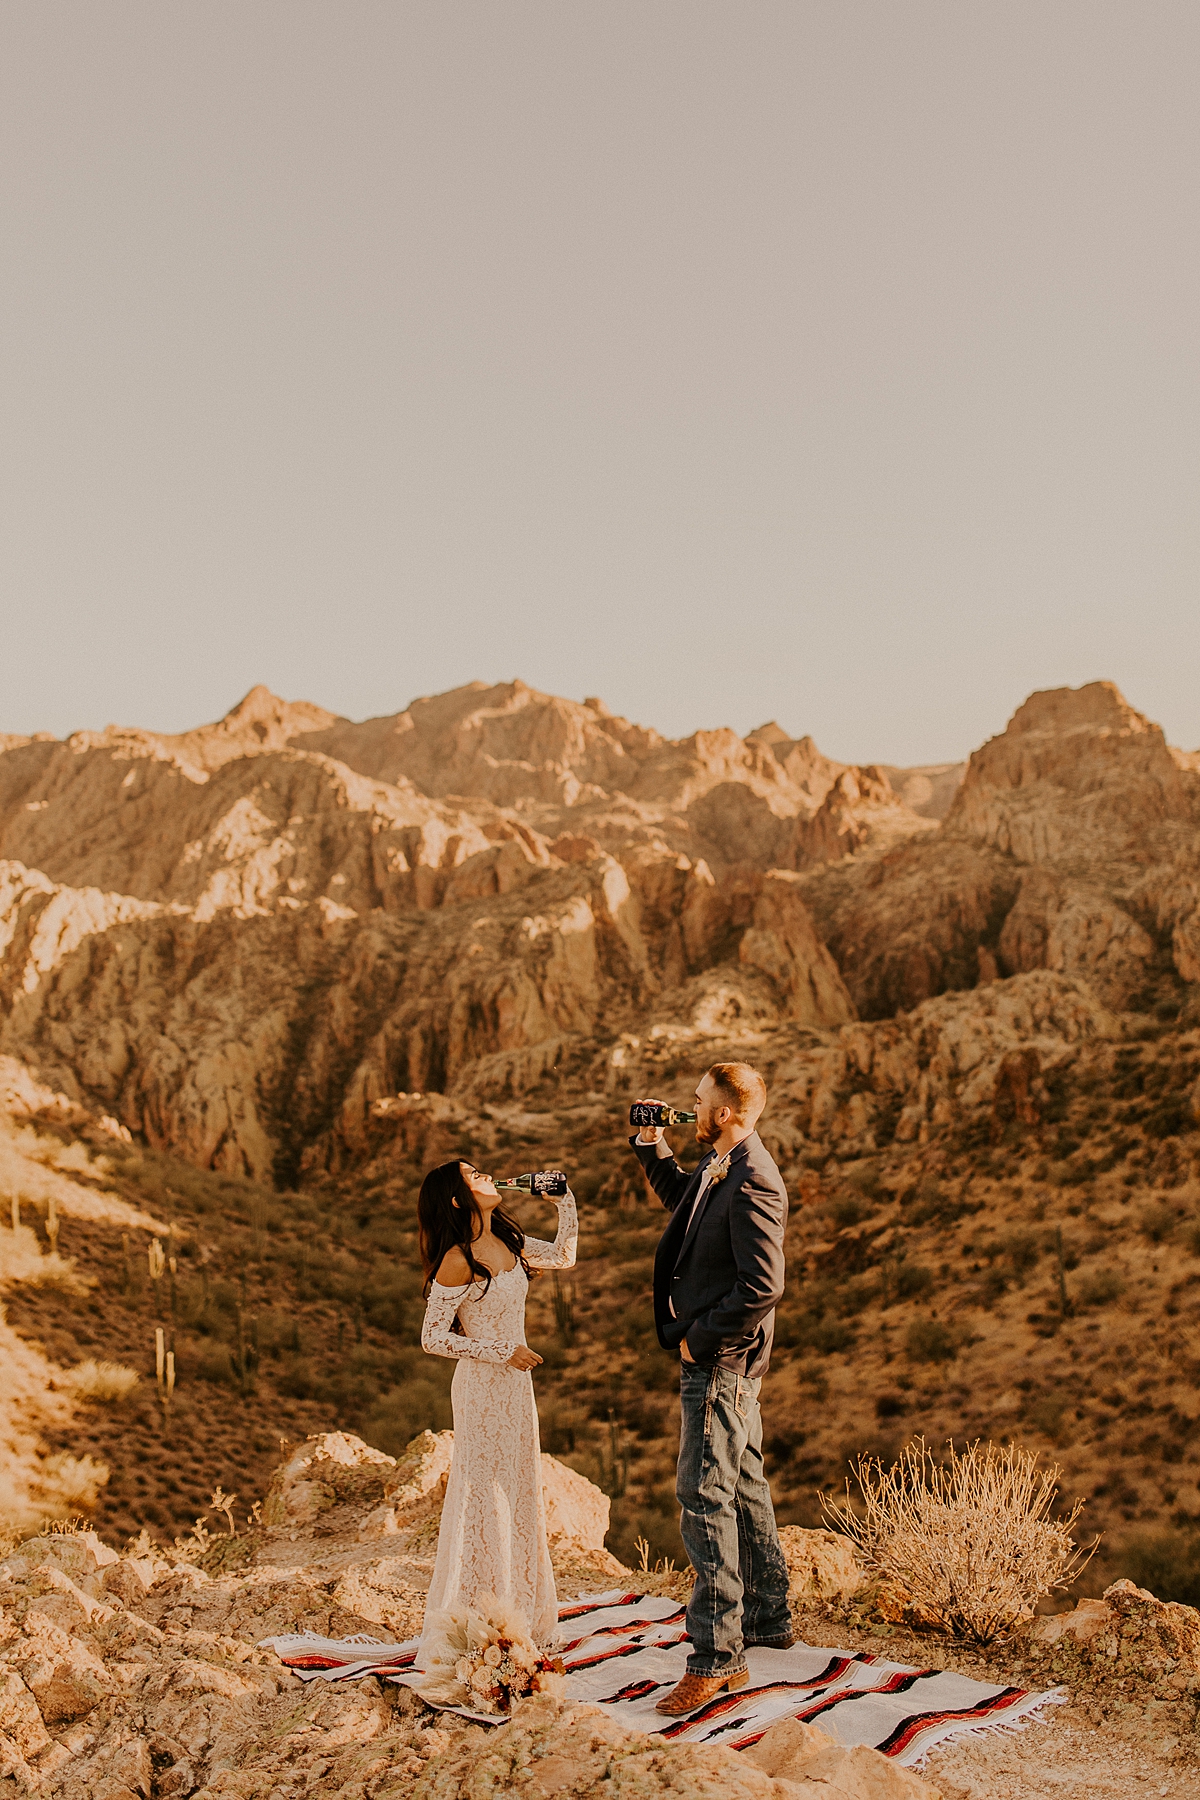 Intimate-elopement-in-superstition-mountain-wilderness-allison-slater-photography54.jpg